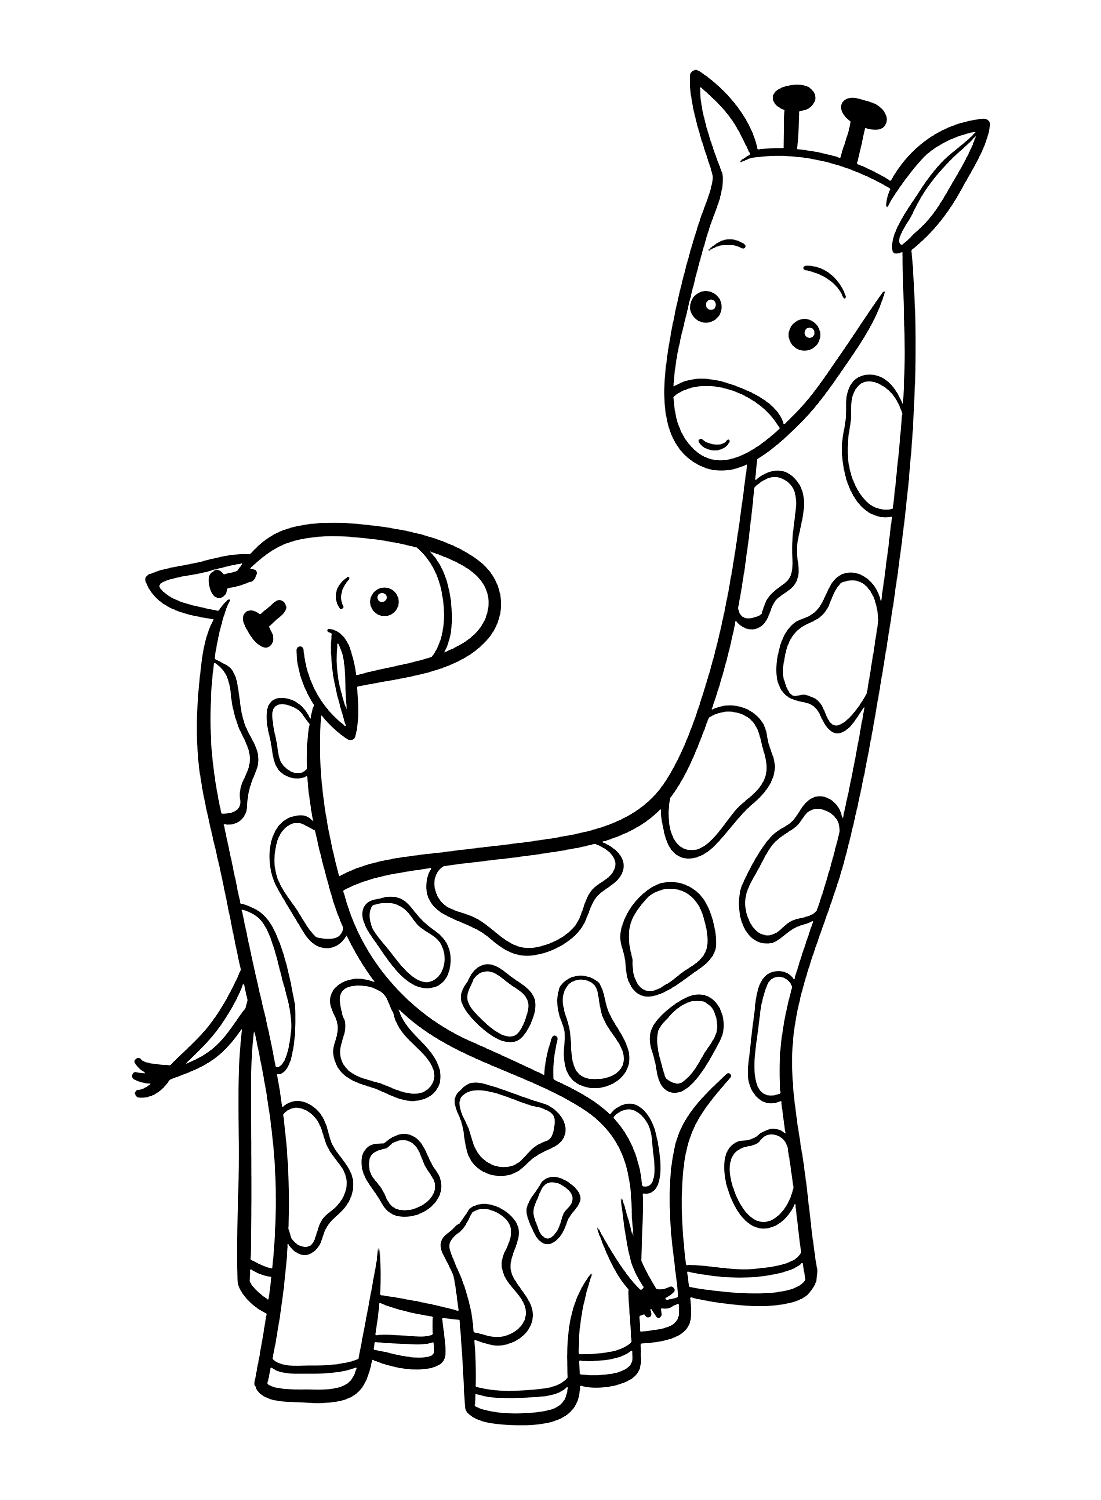 Giraffes coloring pages from Giraffes